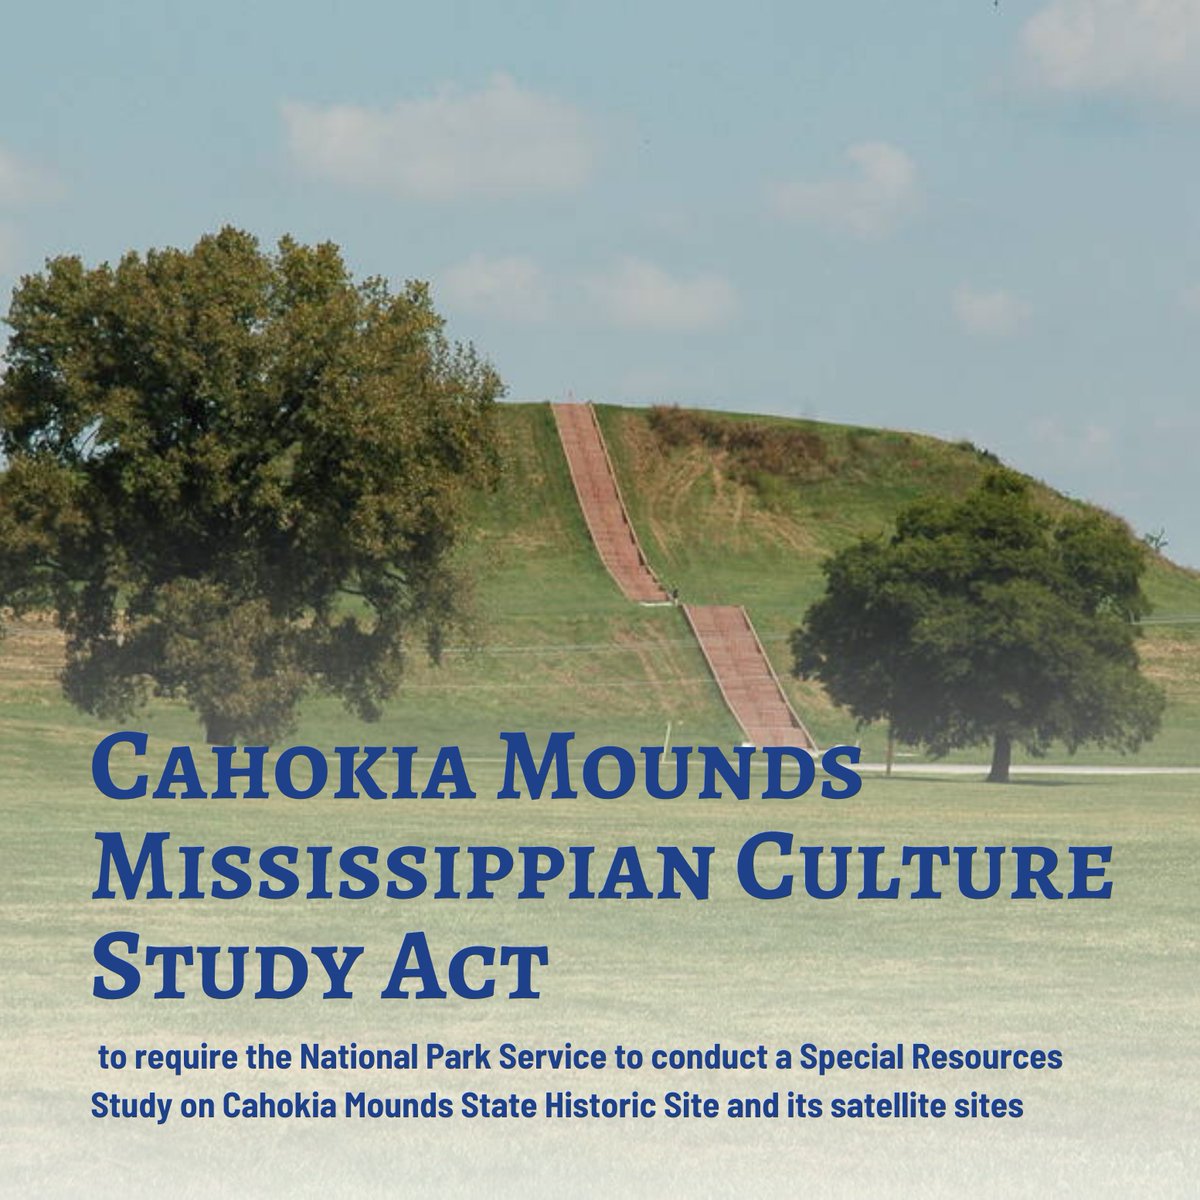 Cahokia Mounds is an important landmark that represents the indigenous peoples & landscapes that once made up America’s first cities in the West.
With this bill, we take another step forward in recognizing it as the cultural asset that it is & preserving the area for generations.